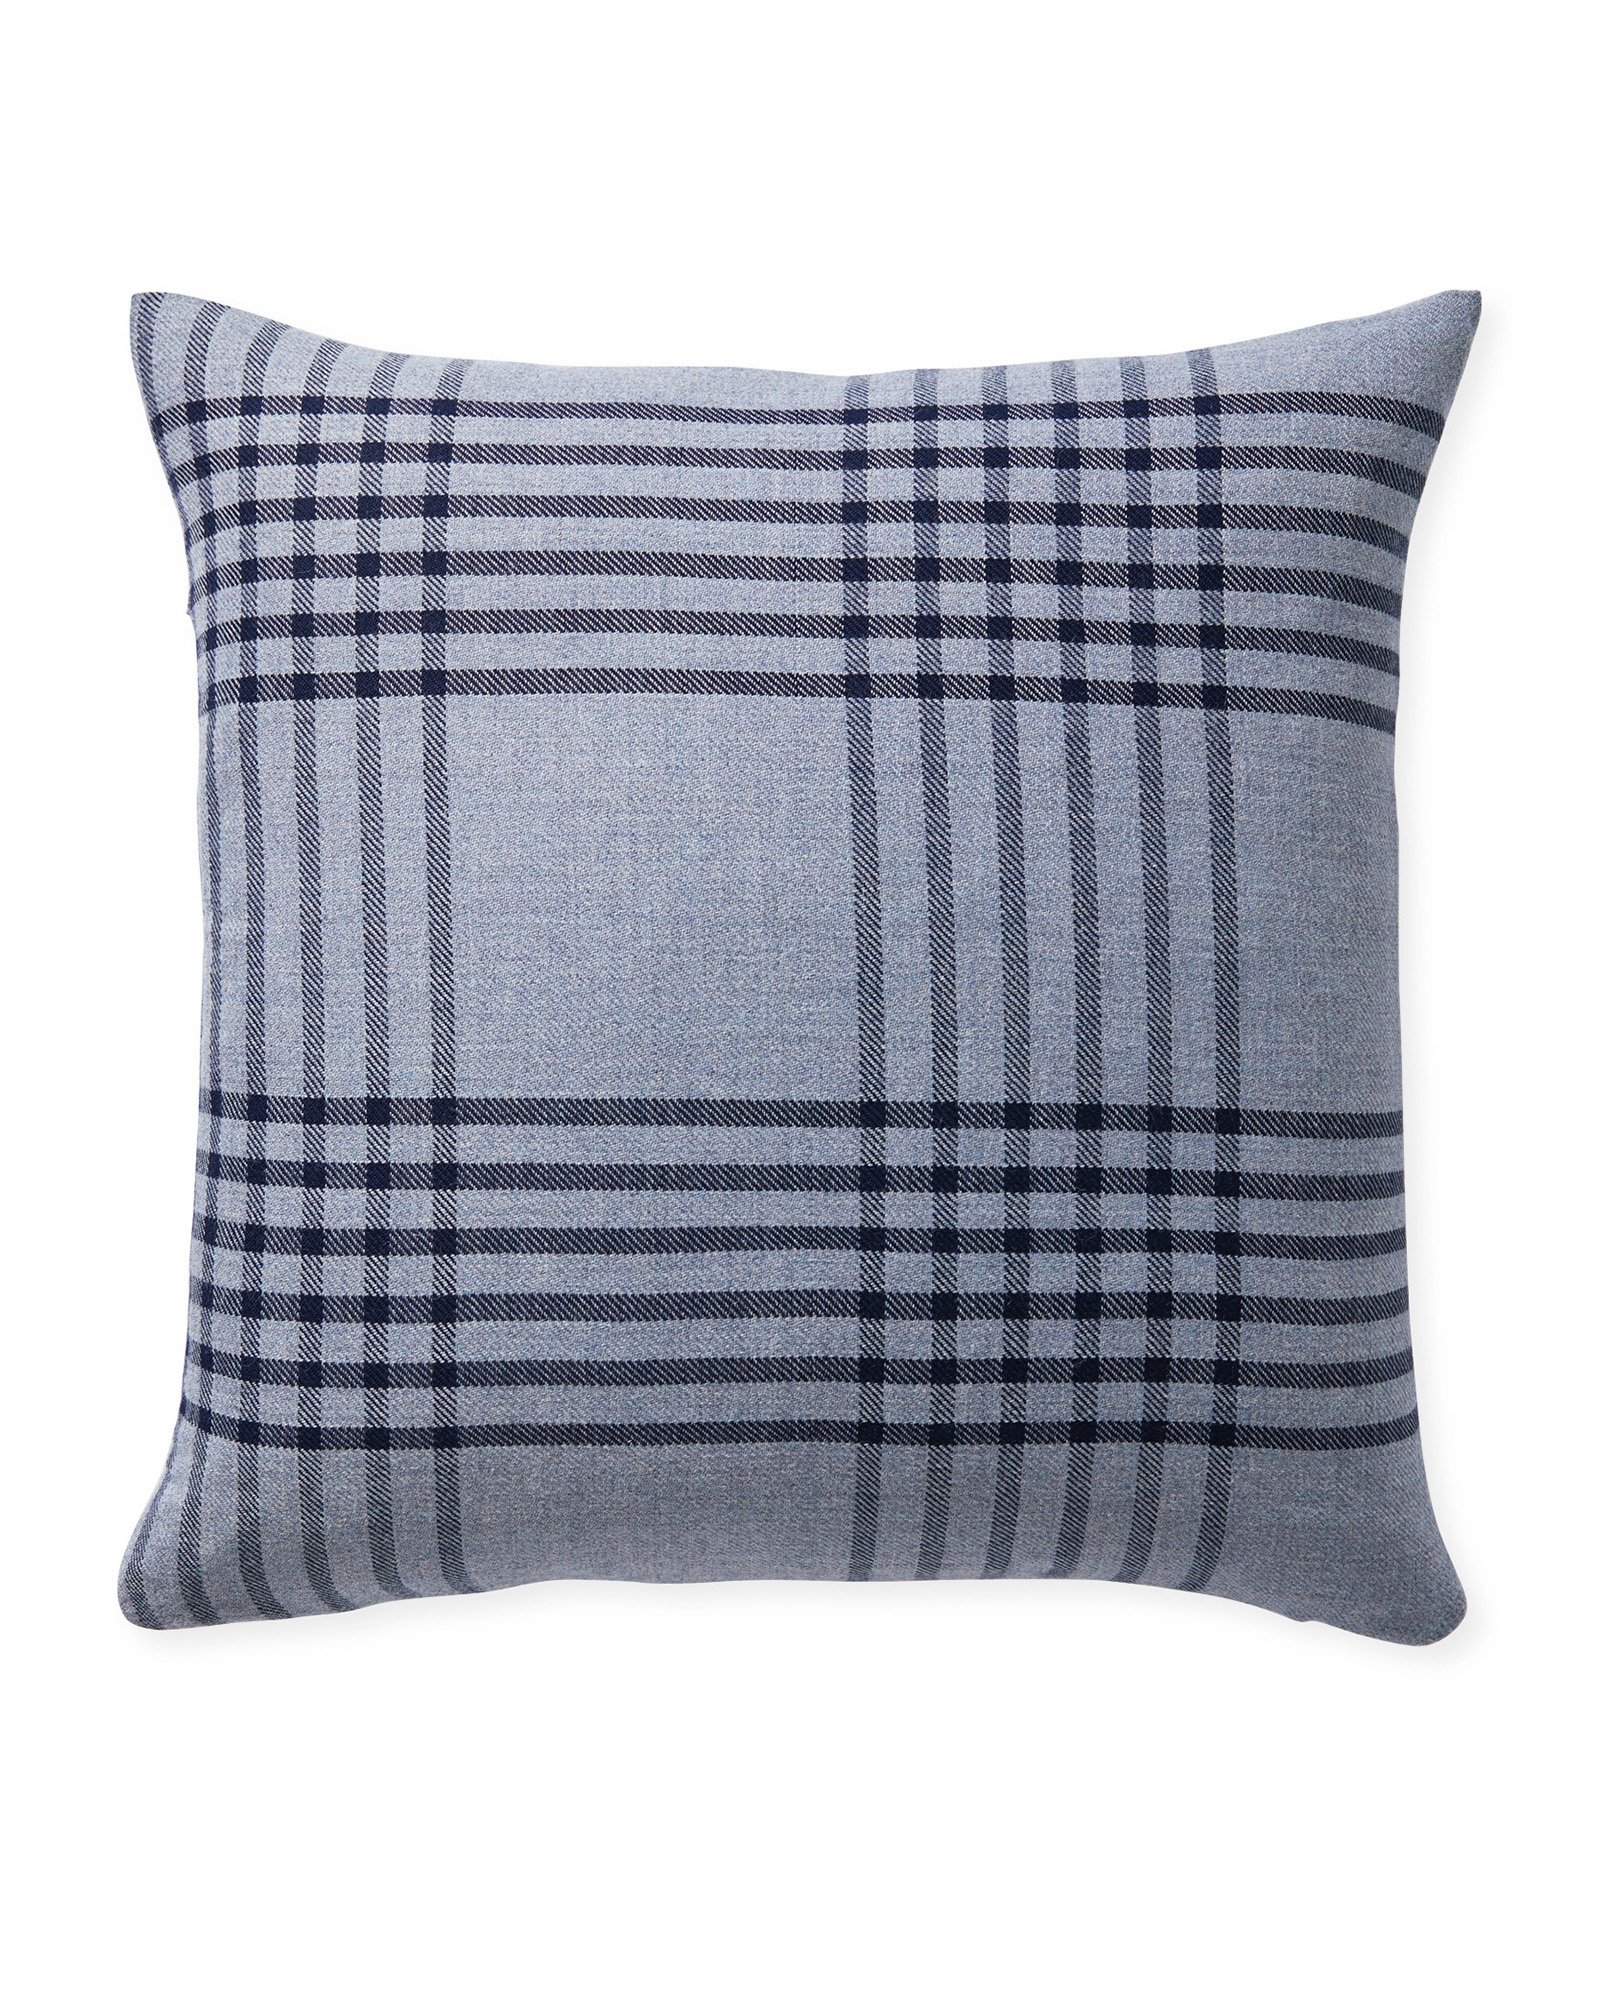 Blakely Plaid 24"SQ. Pillow Cover - Chambray - Insert sold separately - Image 0